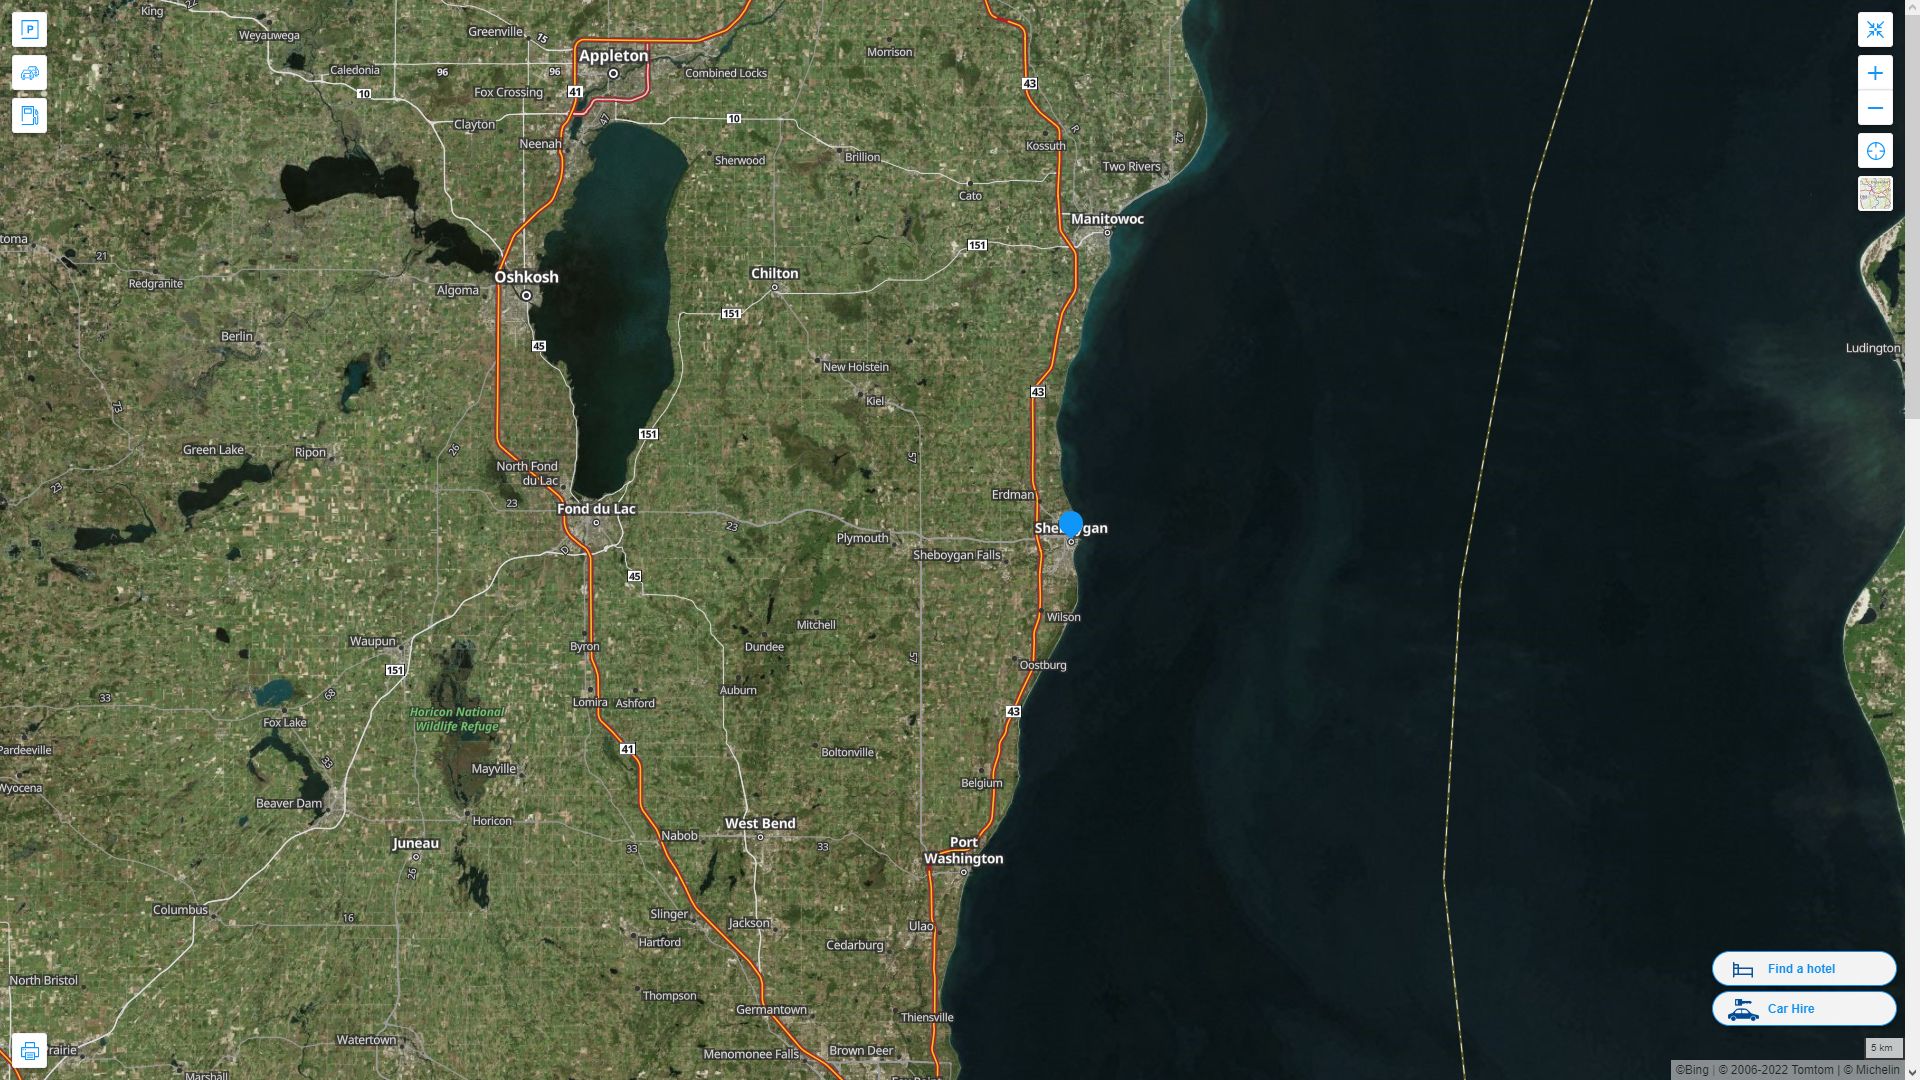 Sheboygan Wisconsin Highway and Road Map with Satellite View